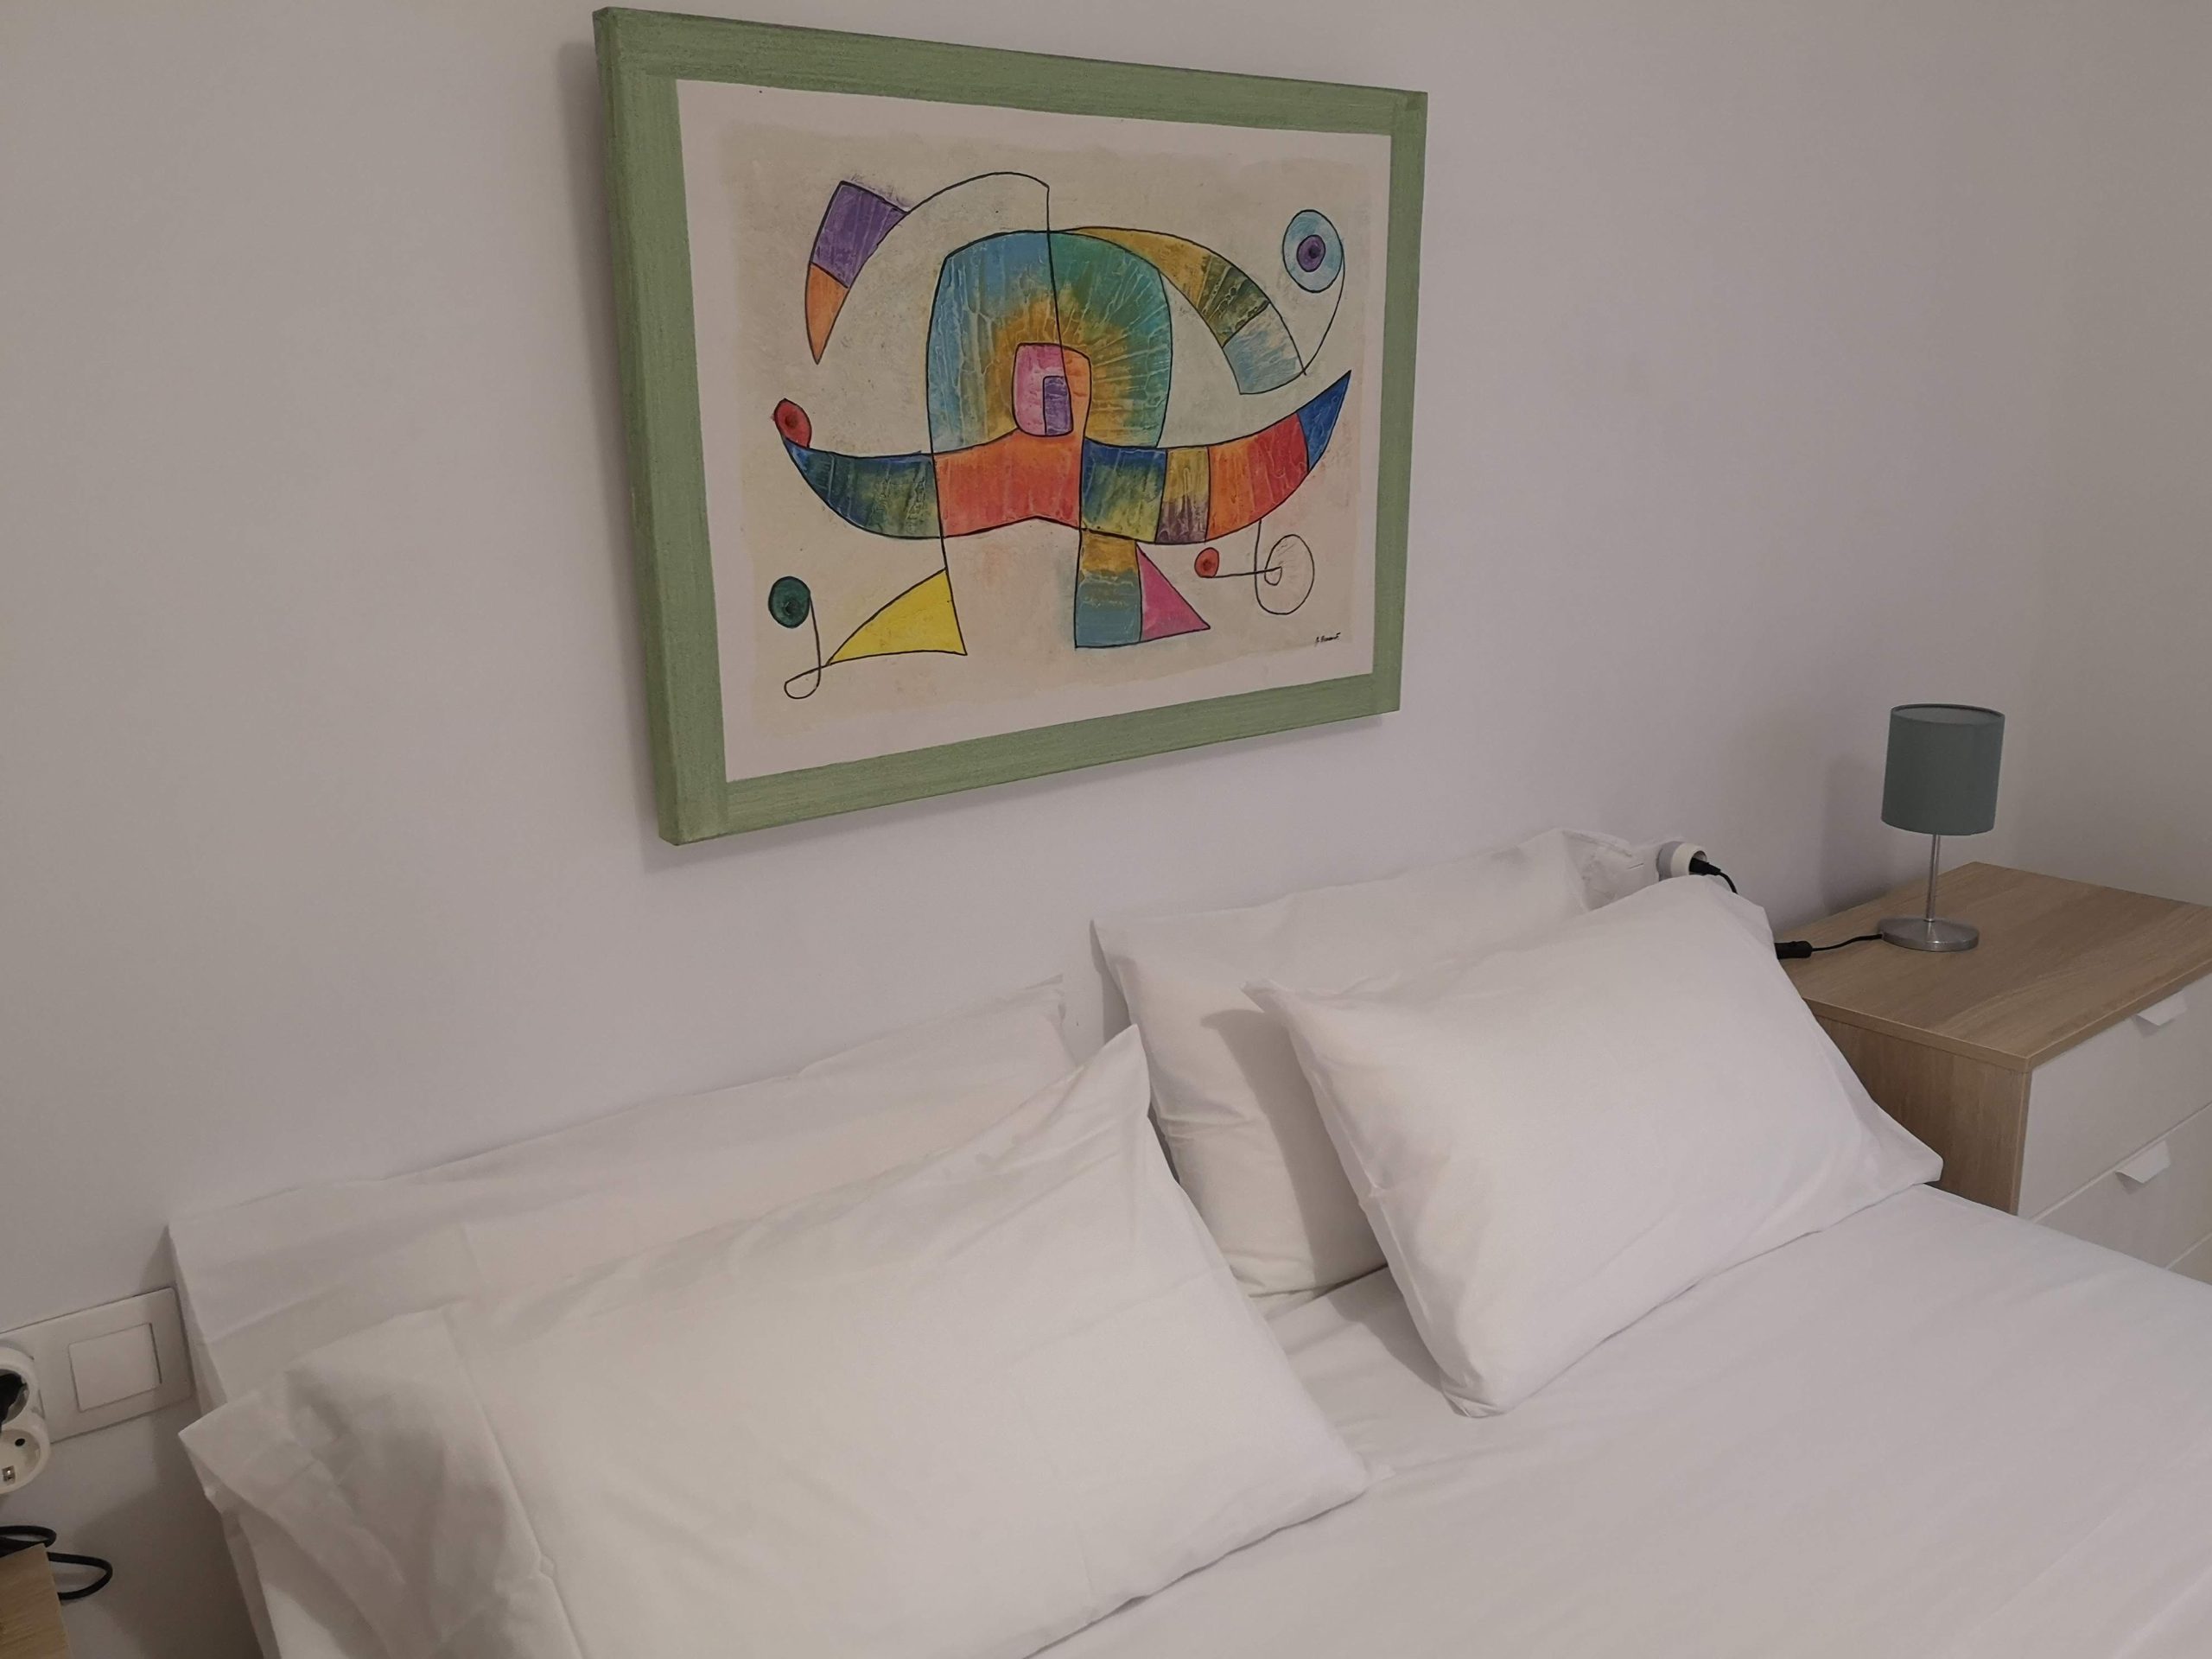 Aparment for rent in Valencia - bedroom